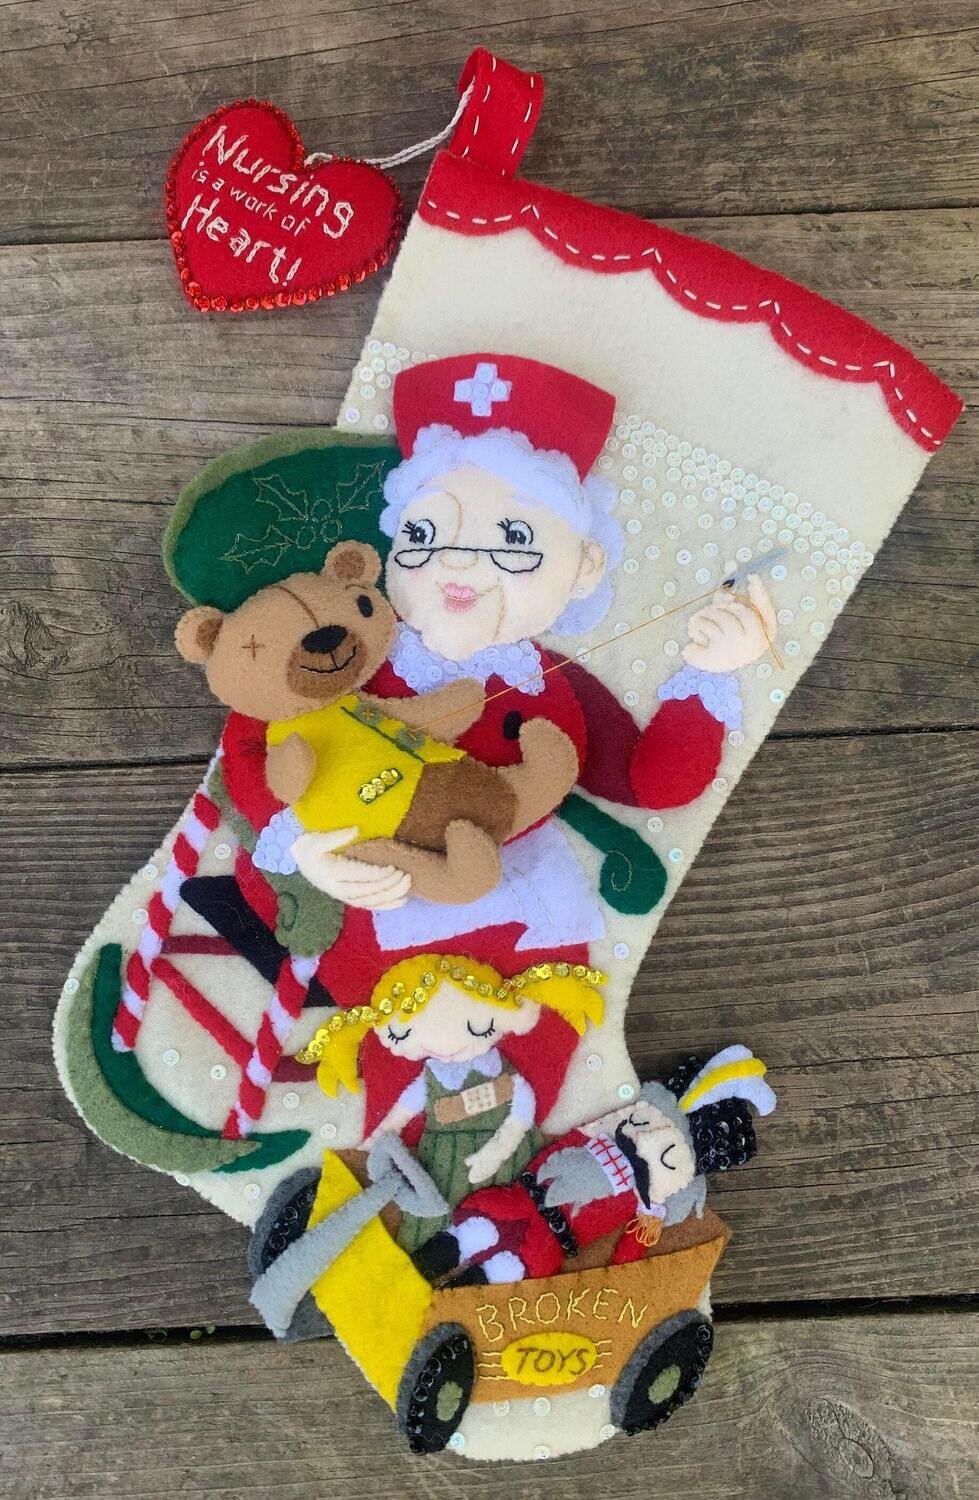 Personalized Custom Christmas Stocking Finished Merry Stocking's North Pole Nurse Mrs. Santa Claus Toys Sewing Fireplace Holiday Home Decor